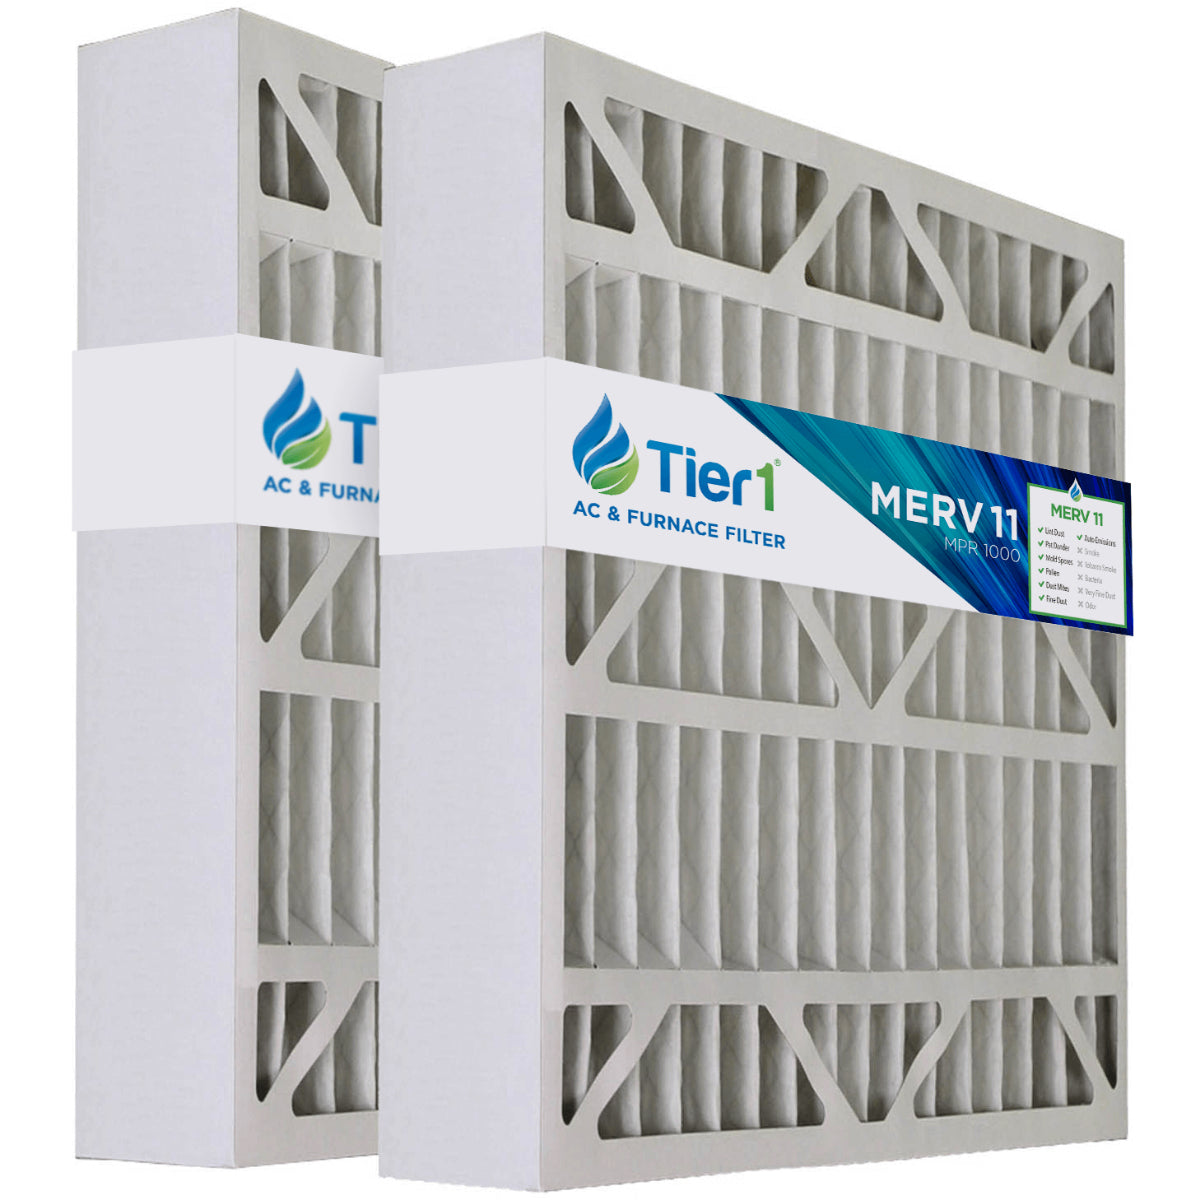 Tier1 20x20x5 Merv 11 Pleated AC Furnace Air Filter 2 Pack (Actual Size: 19 11/16 x 20 11/16 x 4 7/8)